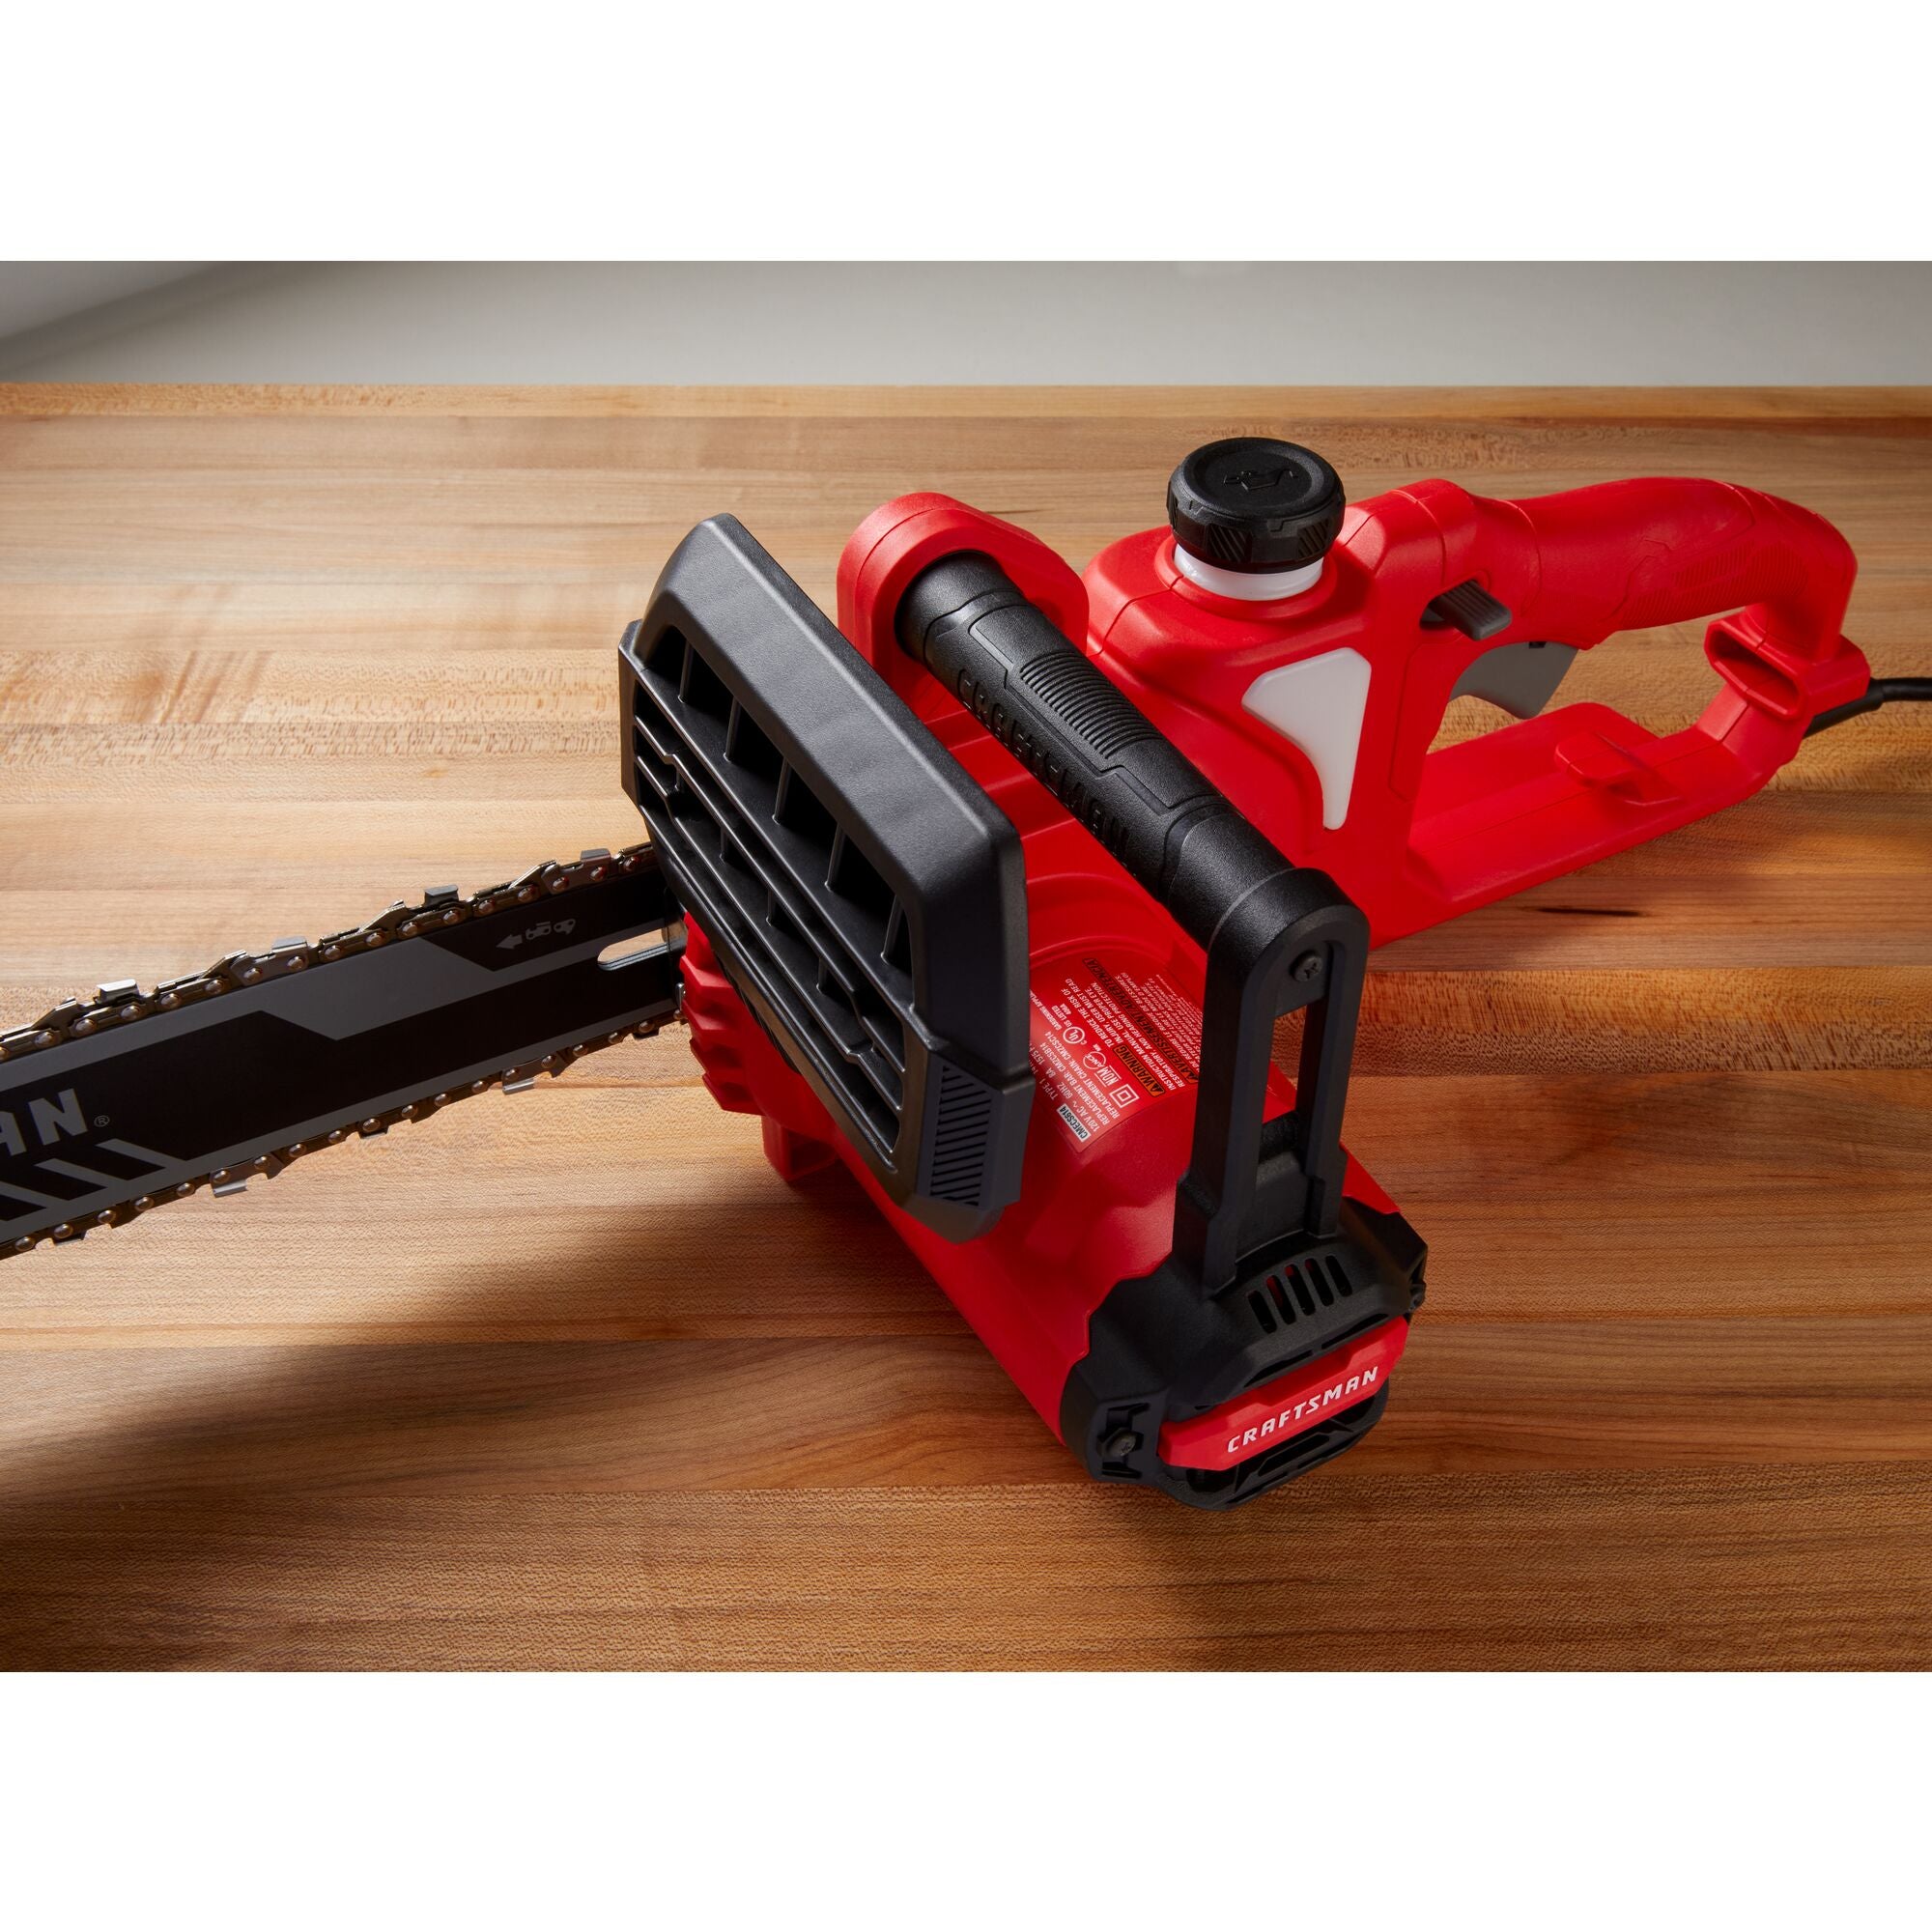 8 Amp 14 In. Electric Chainsaw